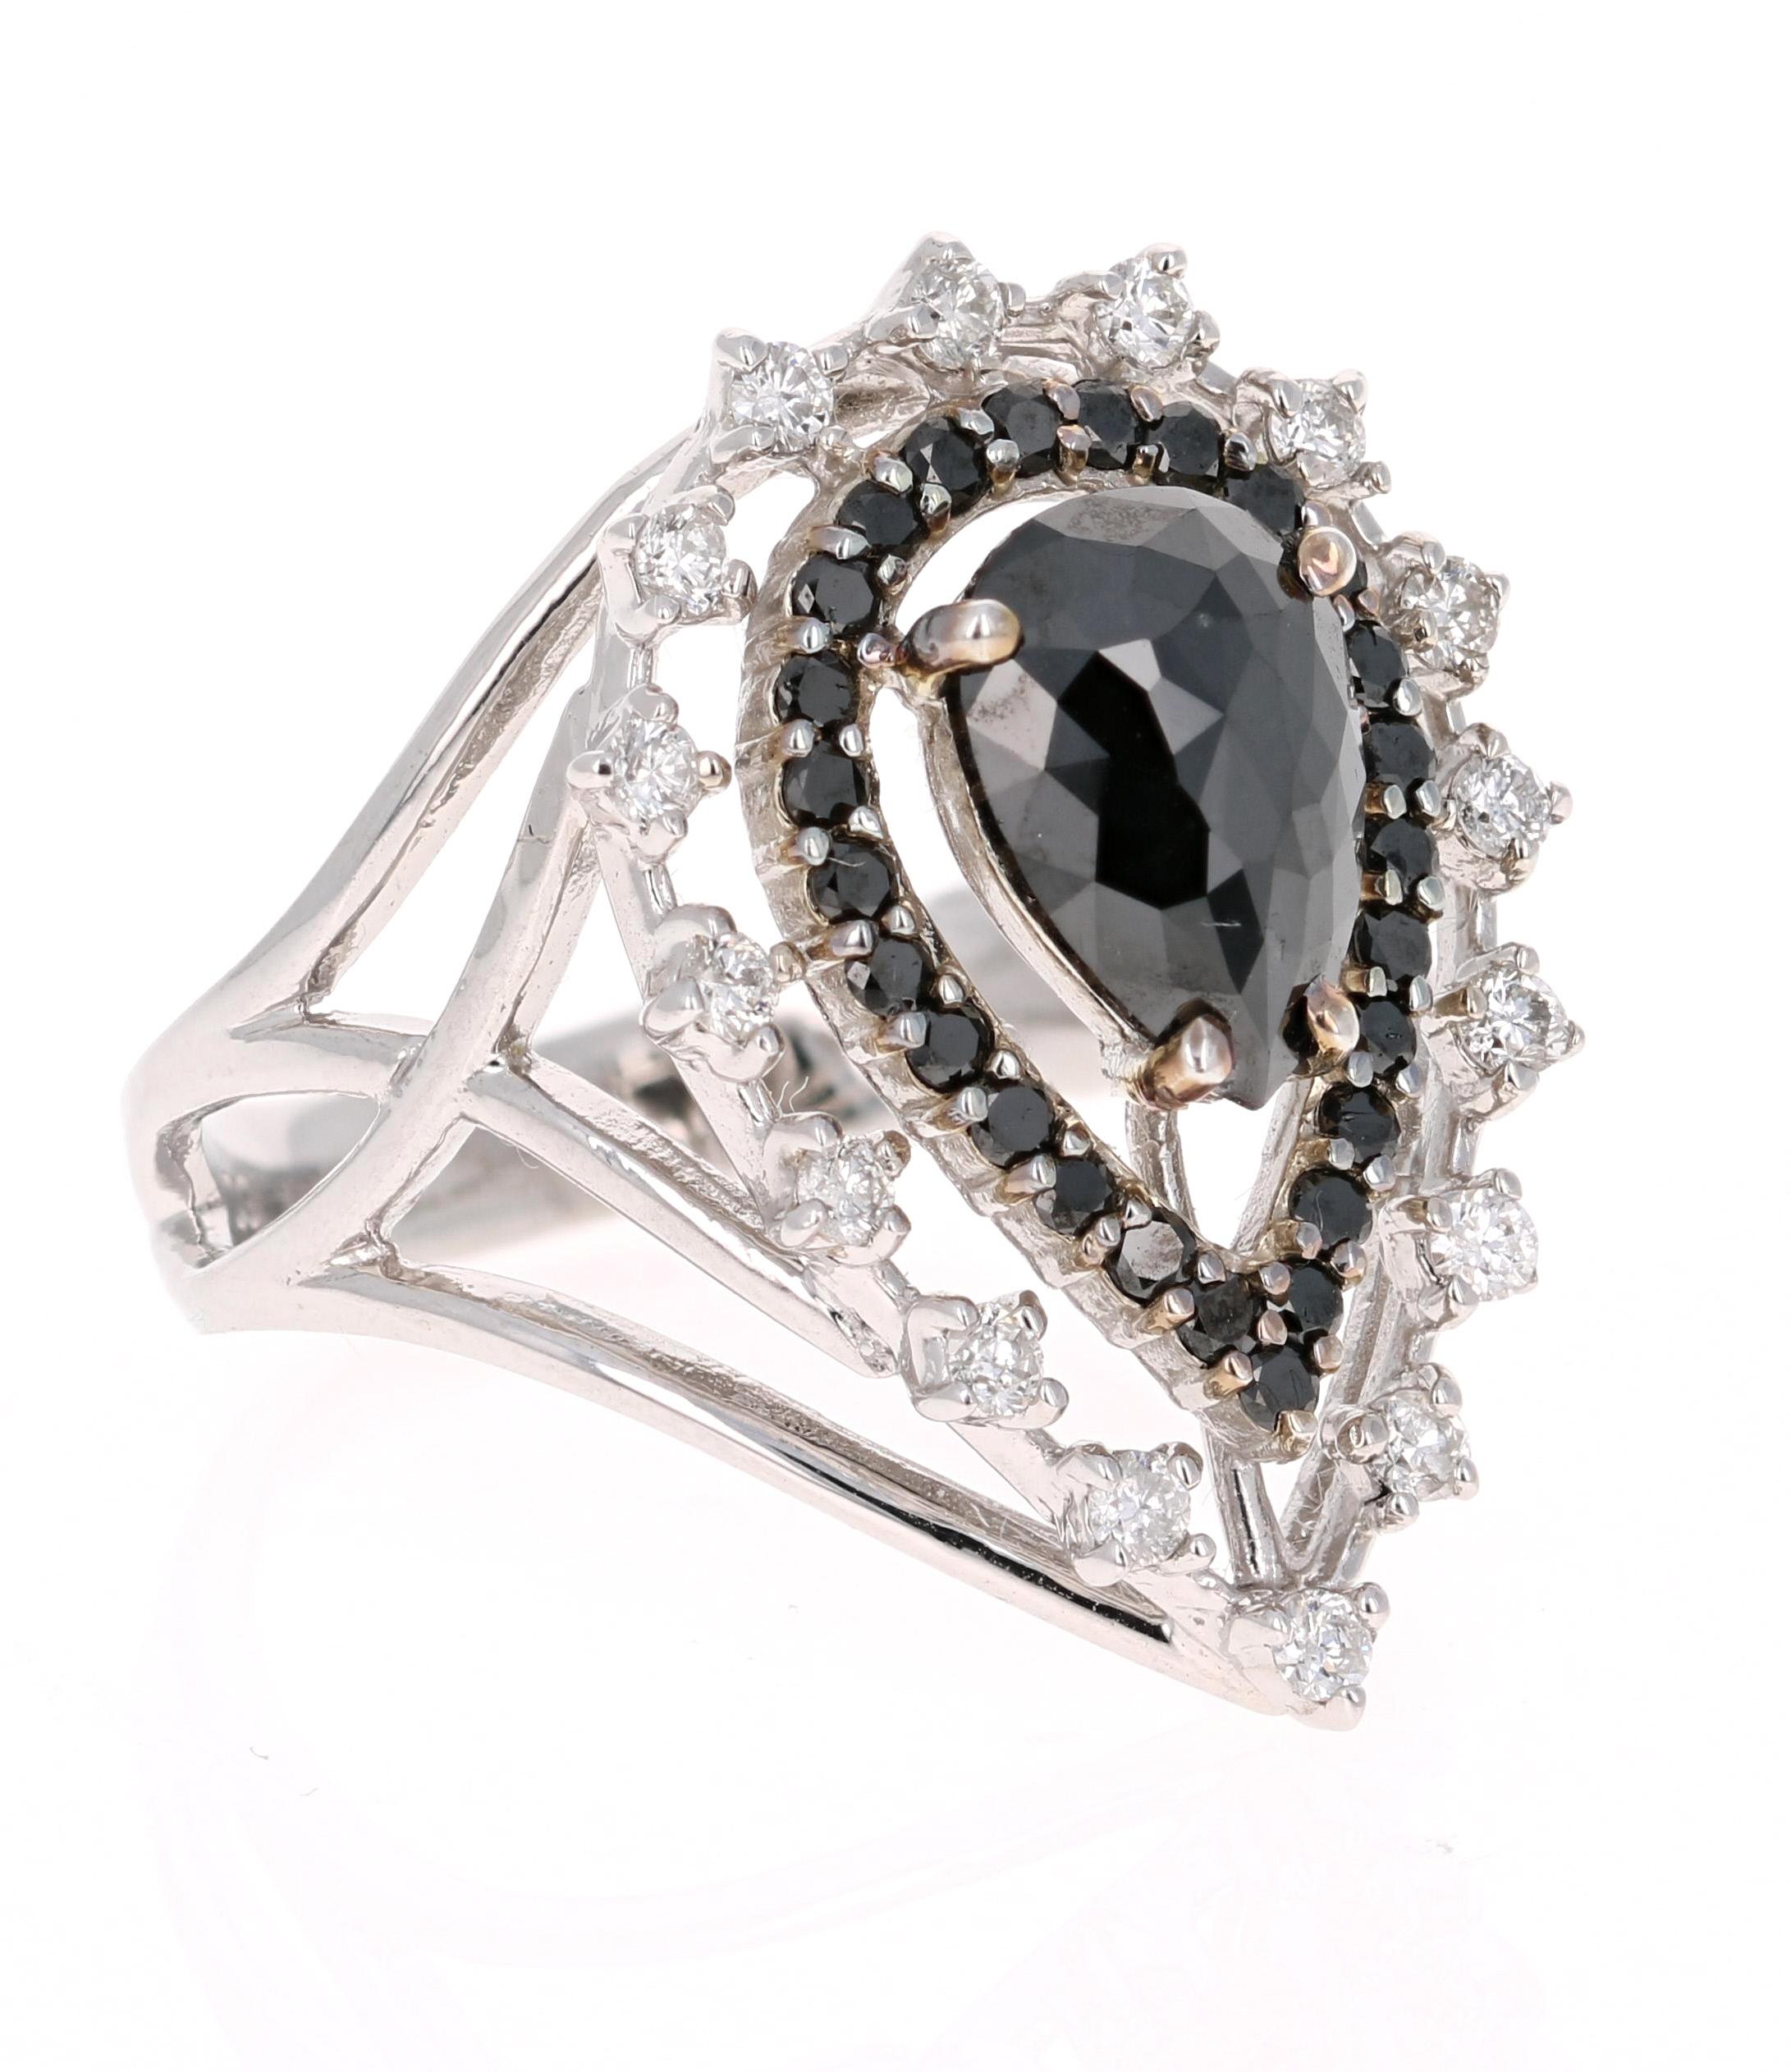 This Black and White Diamond Cocktail Ring is simply a Victorian Inspired Beauty! 

The Pear Cut Black Diamond is 1.31 Carats and is surrounded by a floating halo of 26 Black Round Cut Diamonds weighing 0.33 Carats. Additionally it has 16 Round Cut